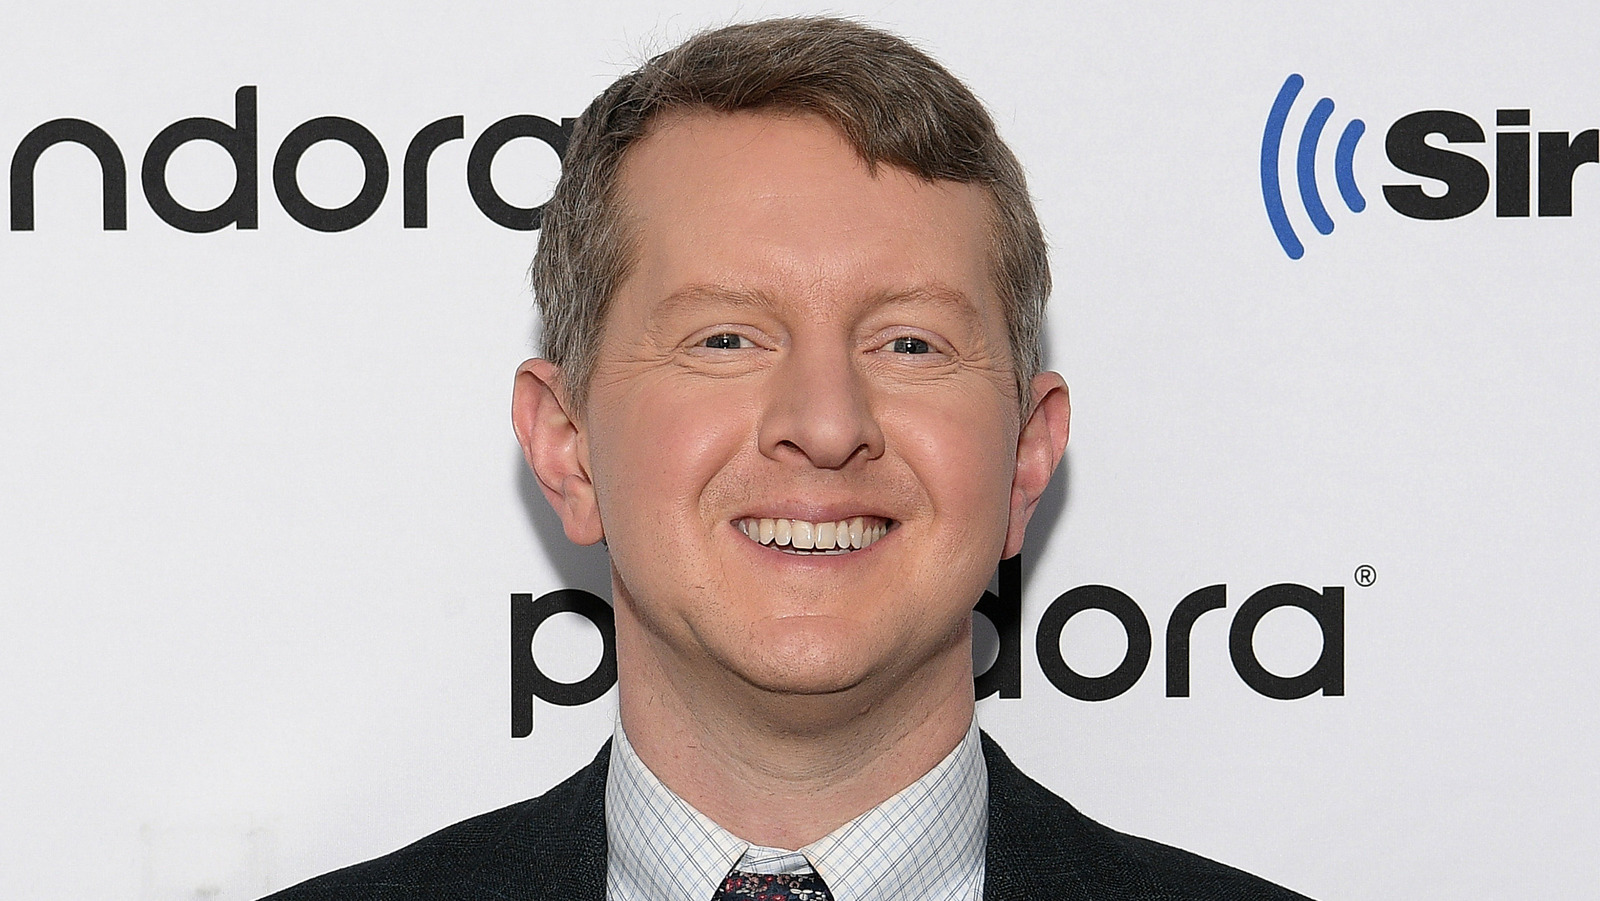 Ken Jennings's Net Worth The Jeopardy Star Earns More Than You Think